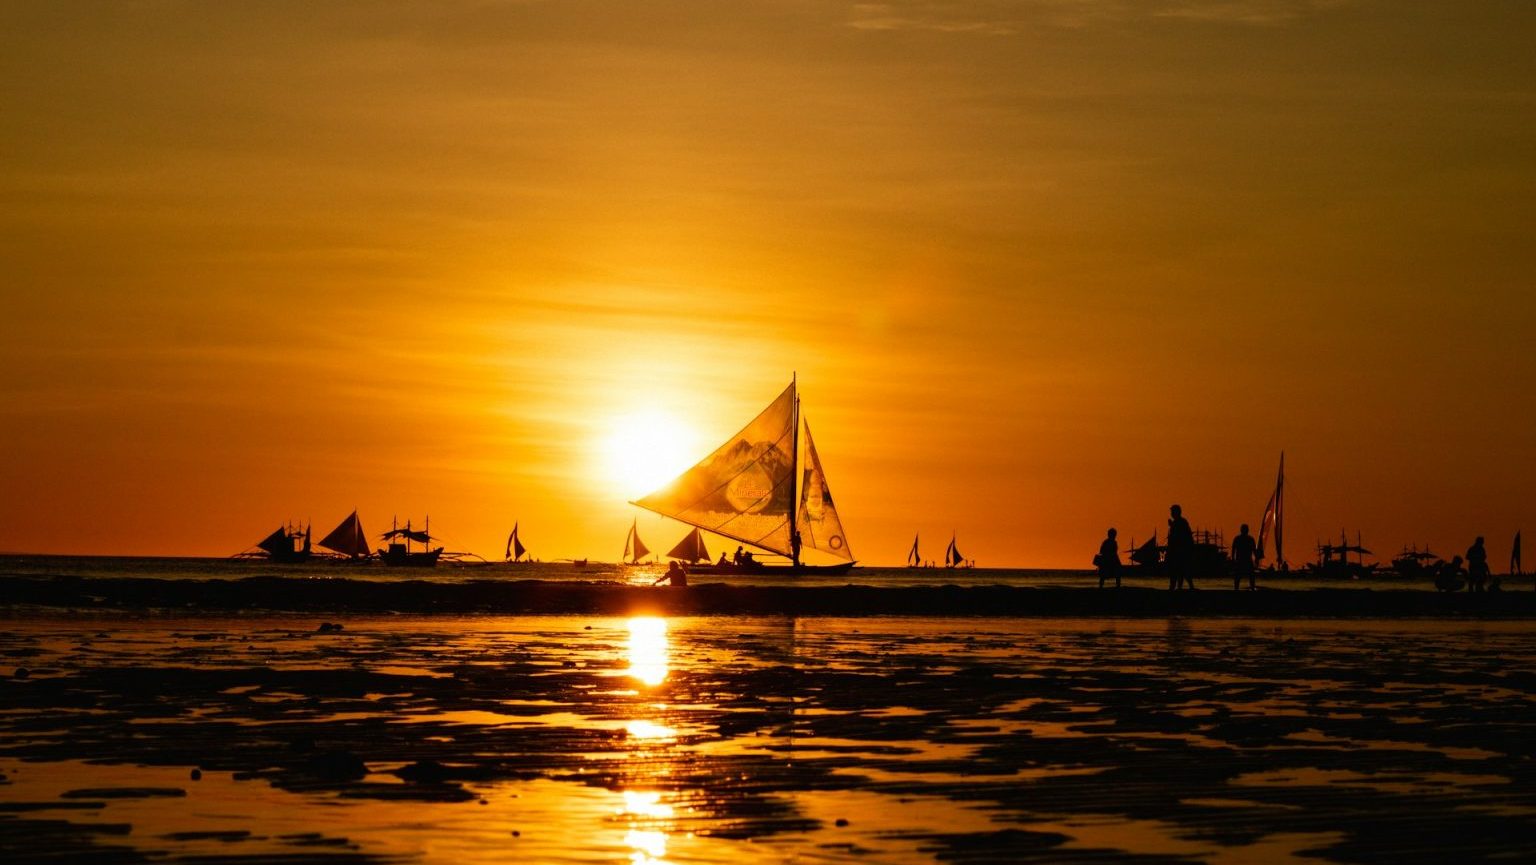 A sailboat is silhouetted against a vibrant sunset over a calm sea, with other boats and their reflections visible in the background. The sky and water have a golden hue.